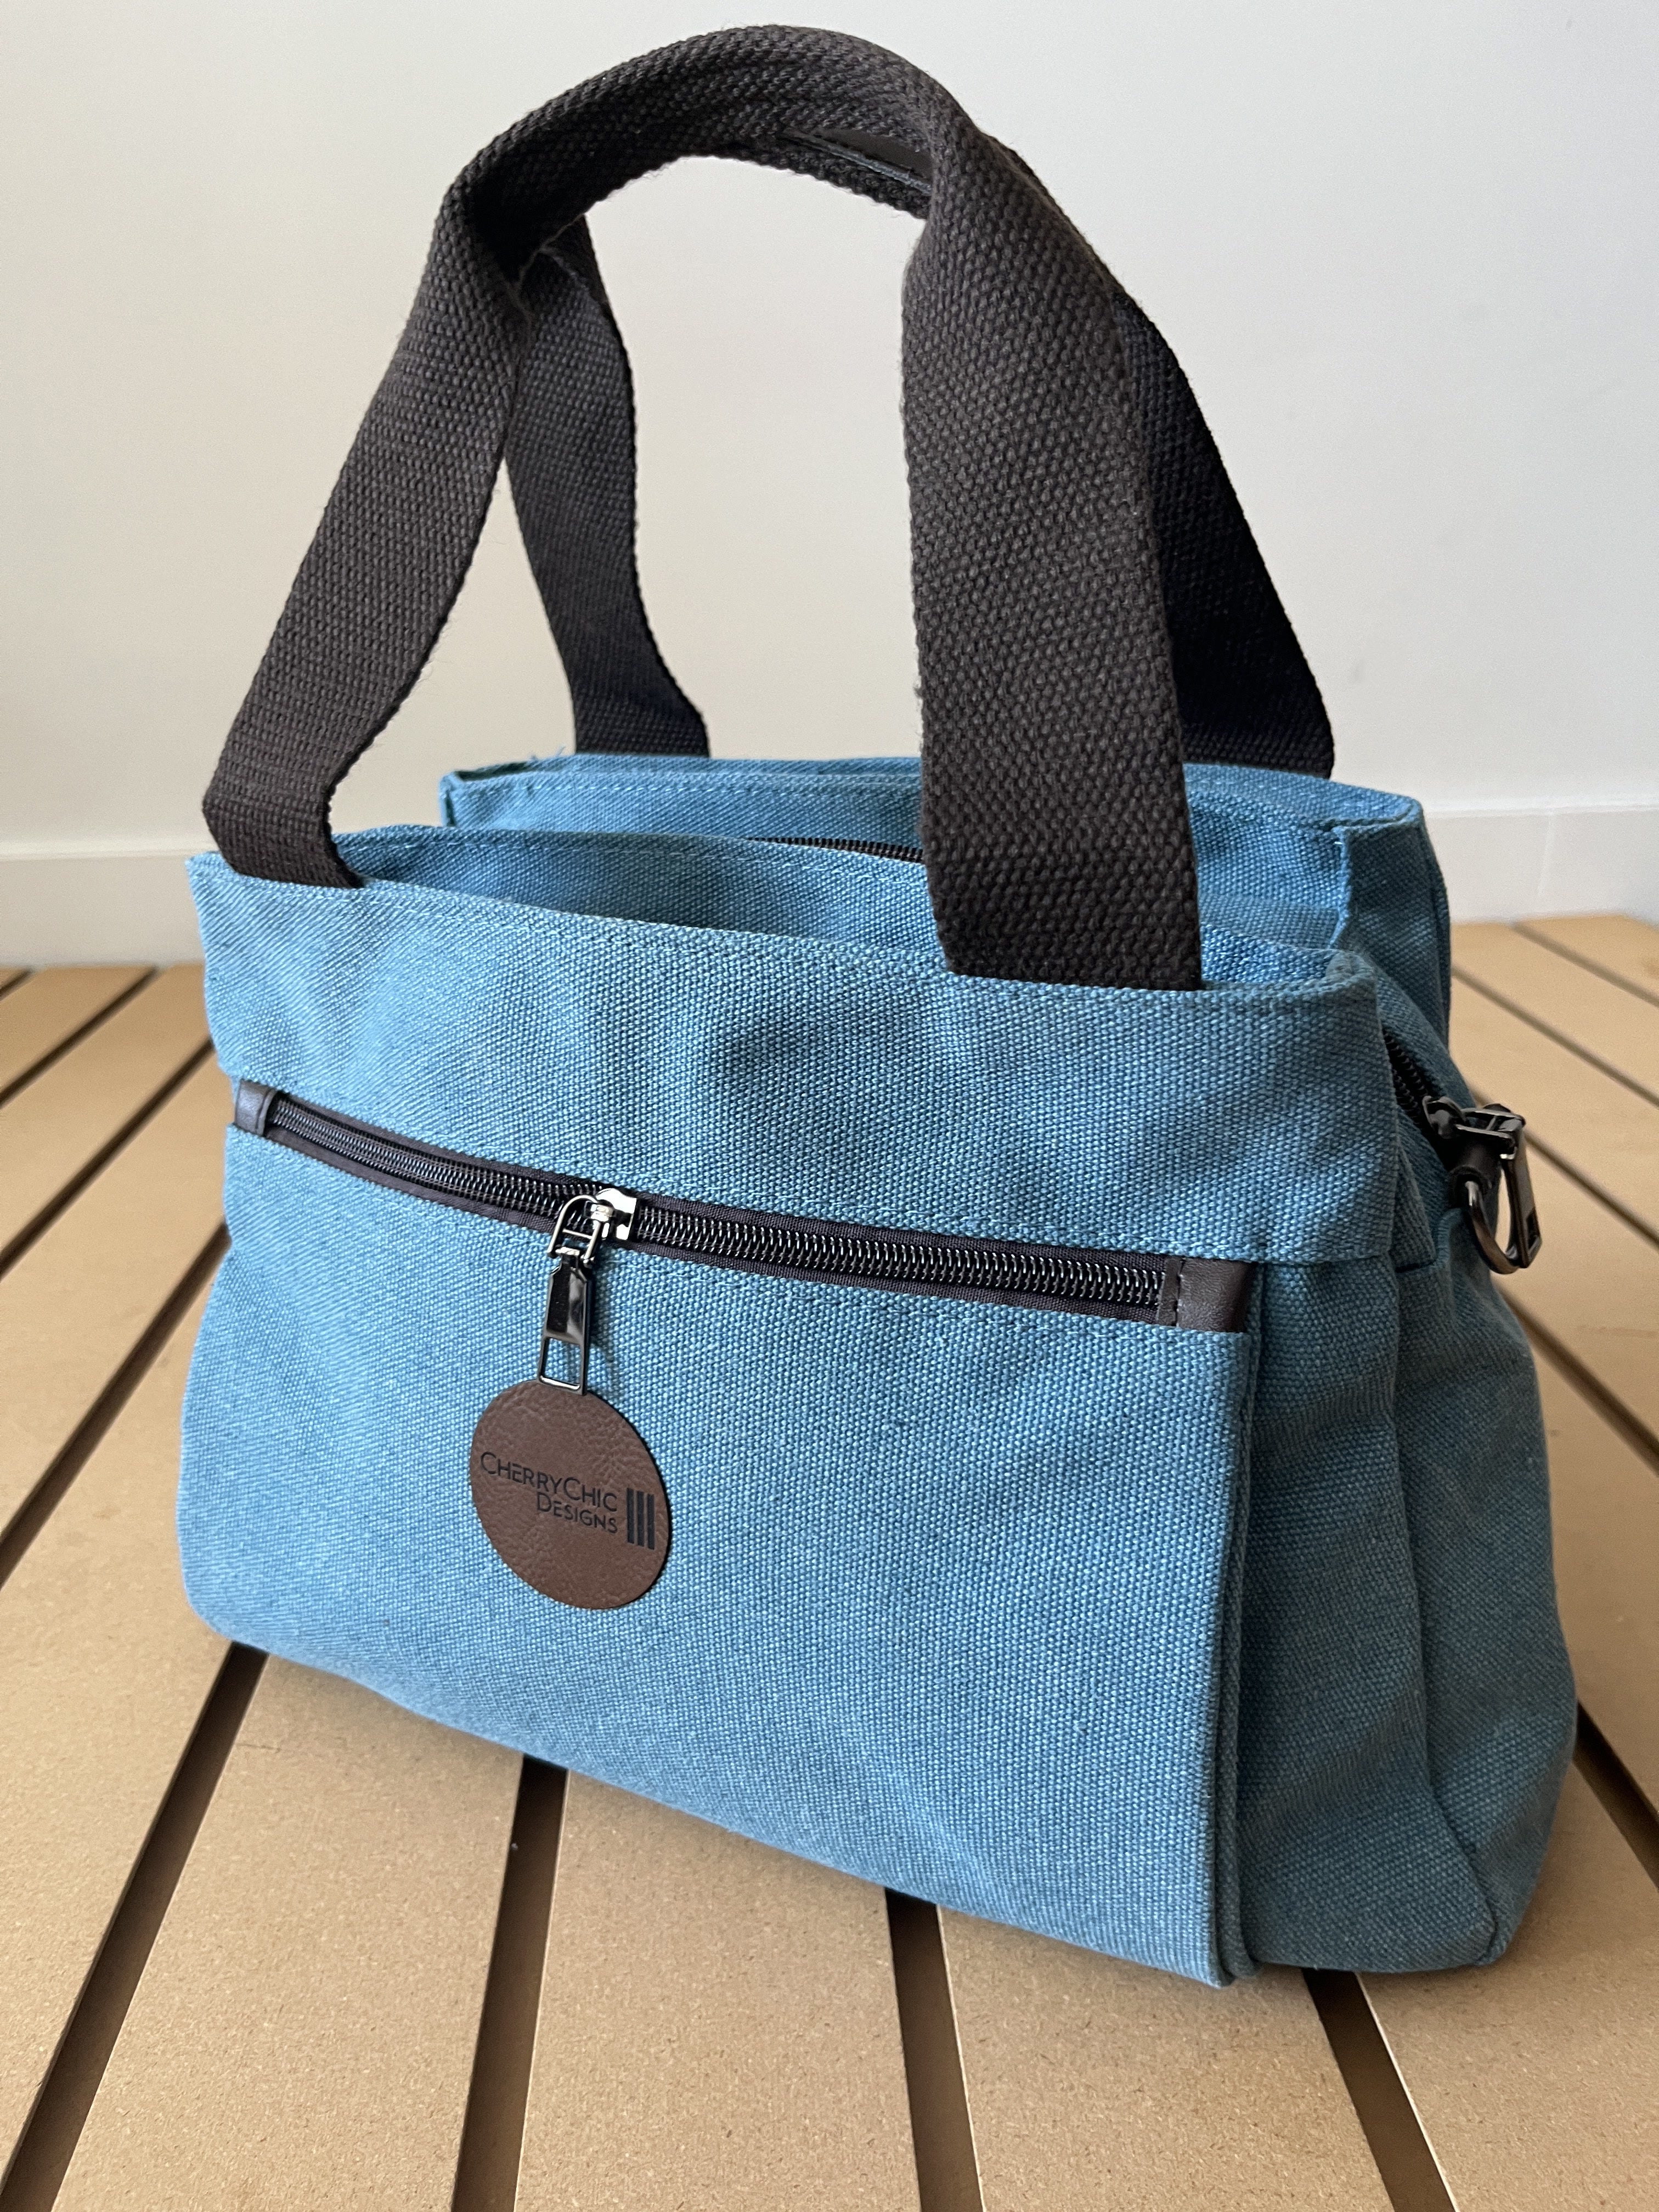 Luxury Designer Tote Bag And Canvas Shoulder Bag Set With Leather Trim  Handle Large Canvas Shopping Bag, Beach Bag For Women, Cotton Handbag, And  Duffle Purse From Bagslvd, $42.31 | DHgate.Com